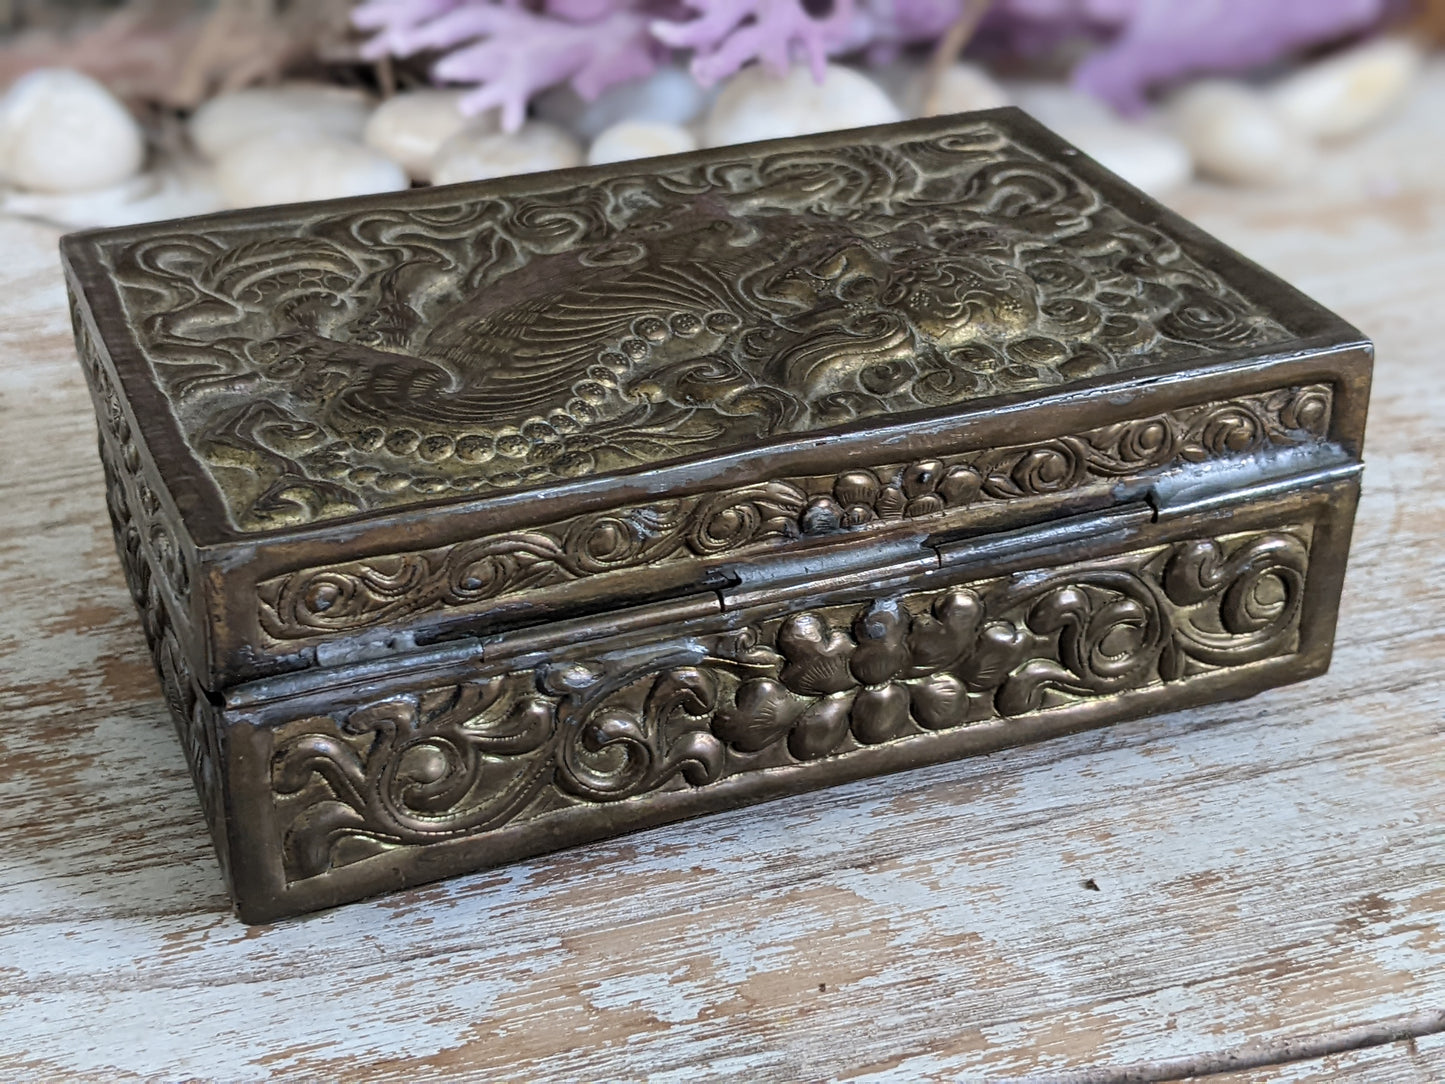 VIntage Chinese Foo Embossed Relief Cedar Box Trinket Cigarette Brass Finish !! Awesome Vintage Gifts !! Unique Gift Ideas !!